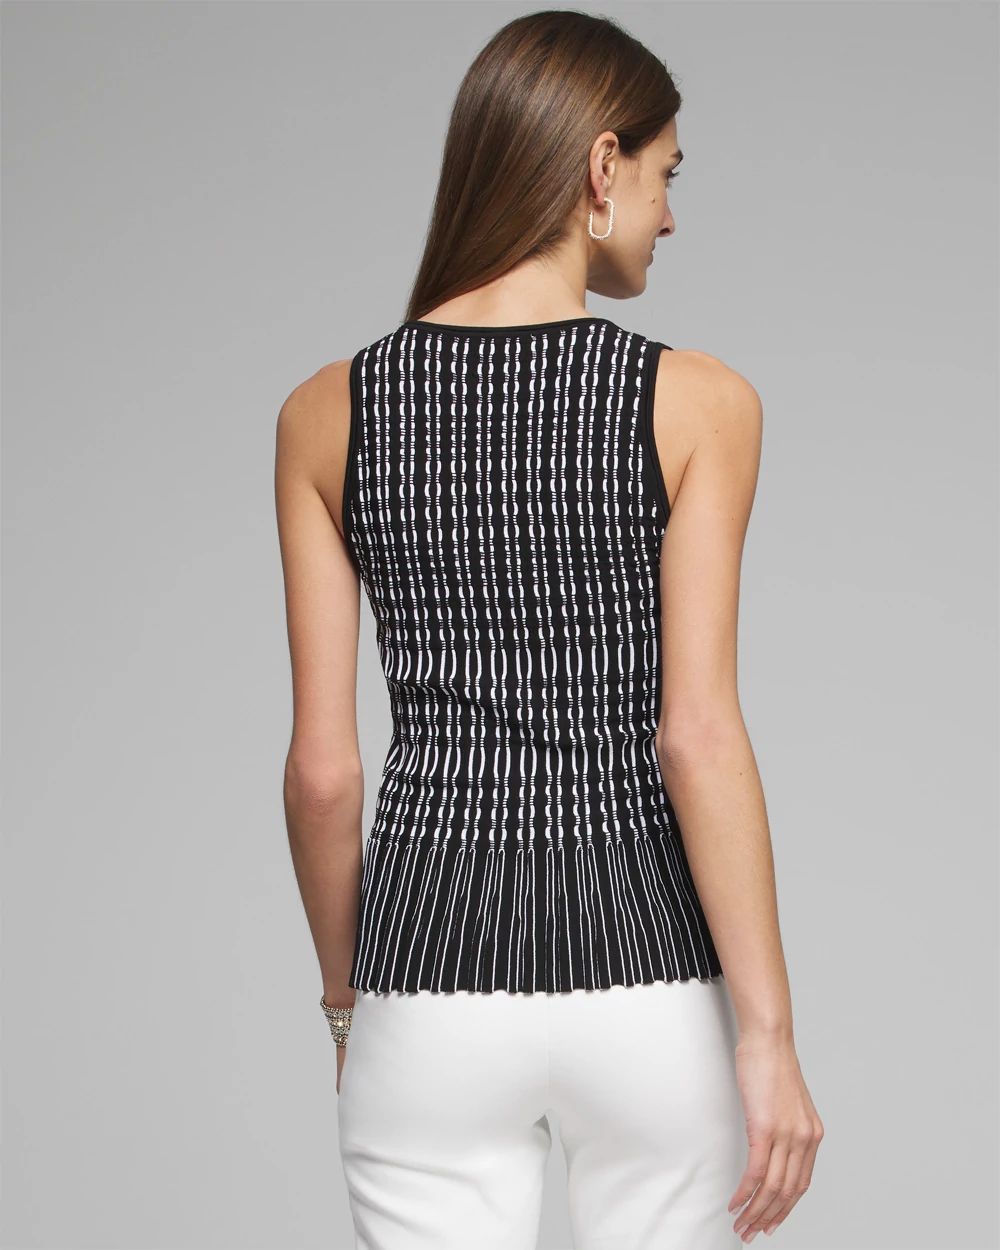 Outlet WHBM Sleeveless V-Neck Peplum Top click to view larger image.